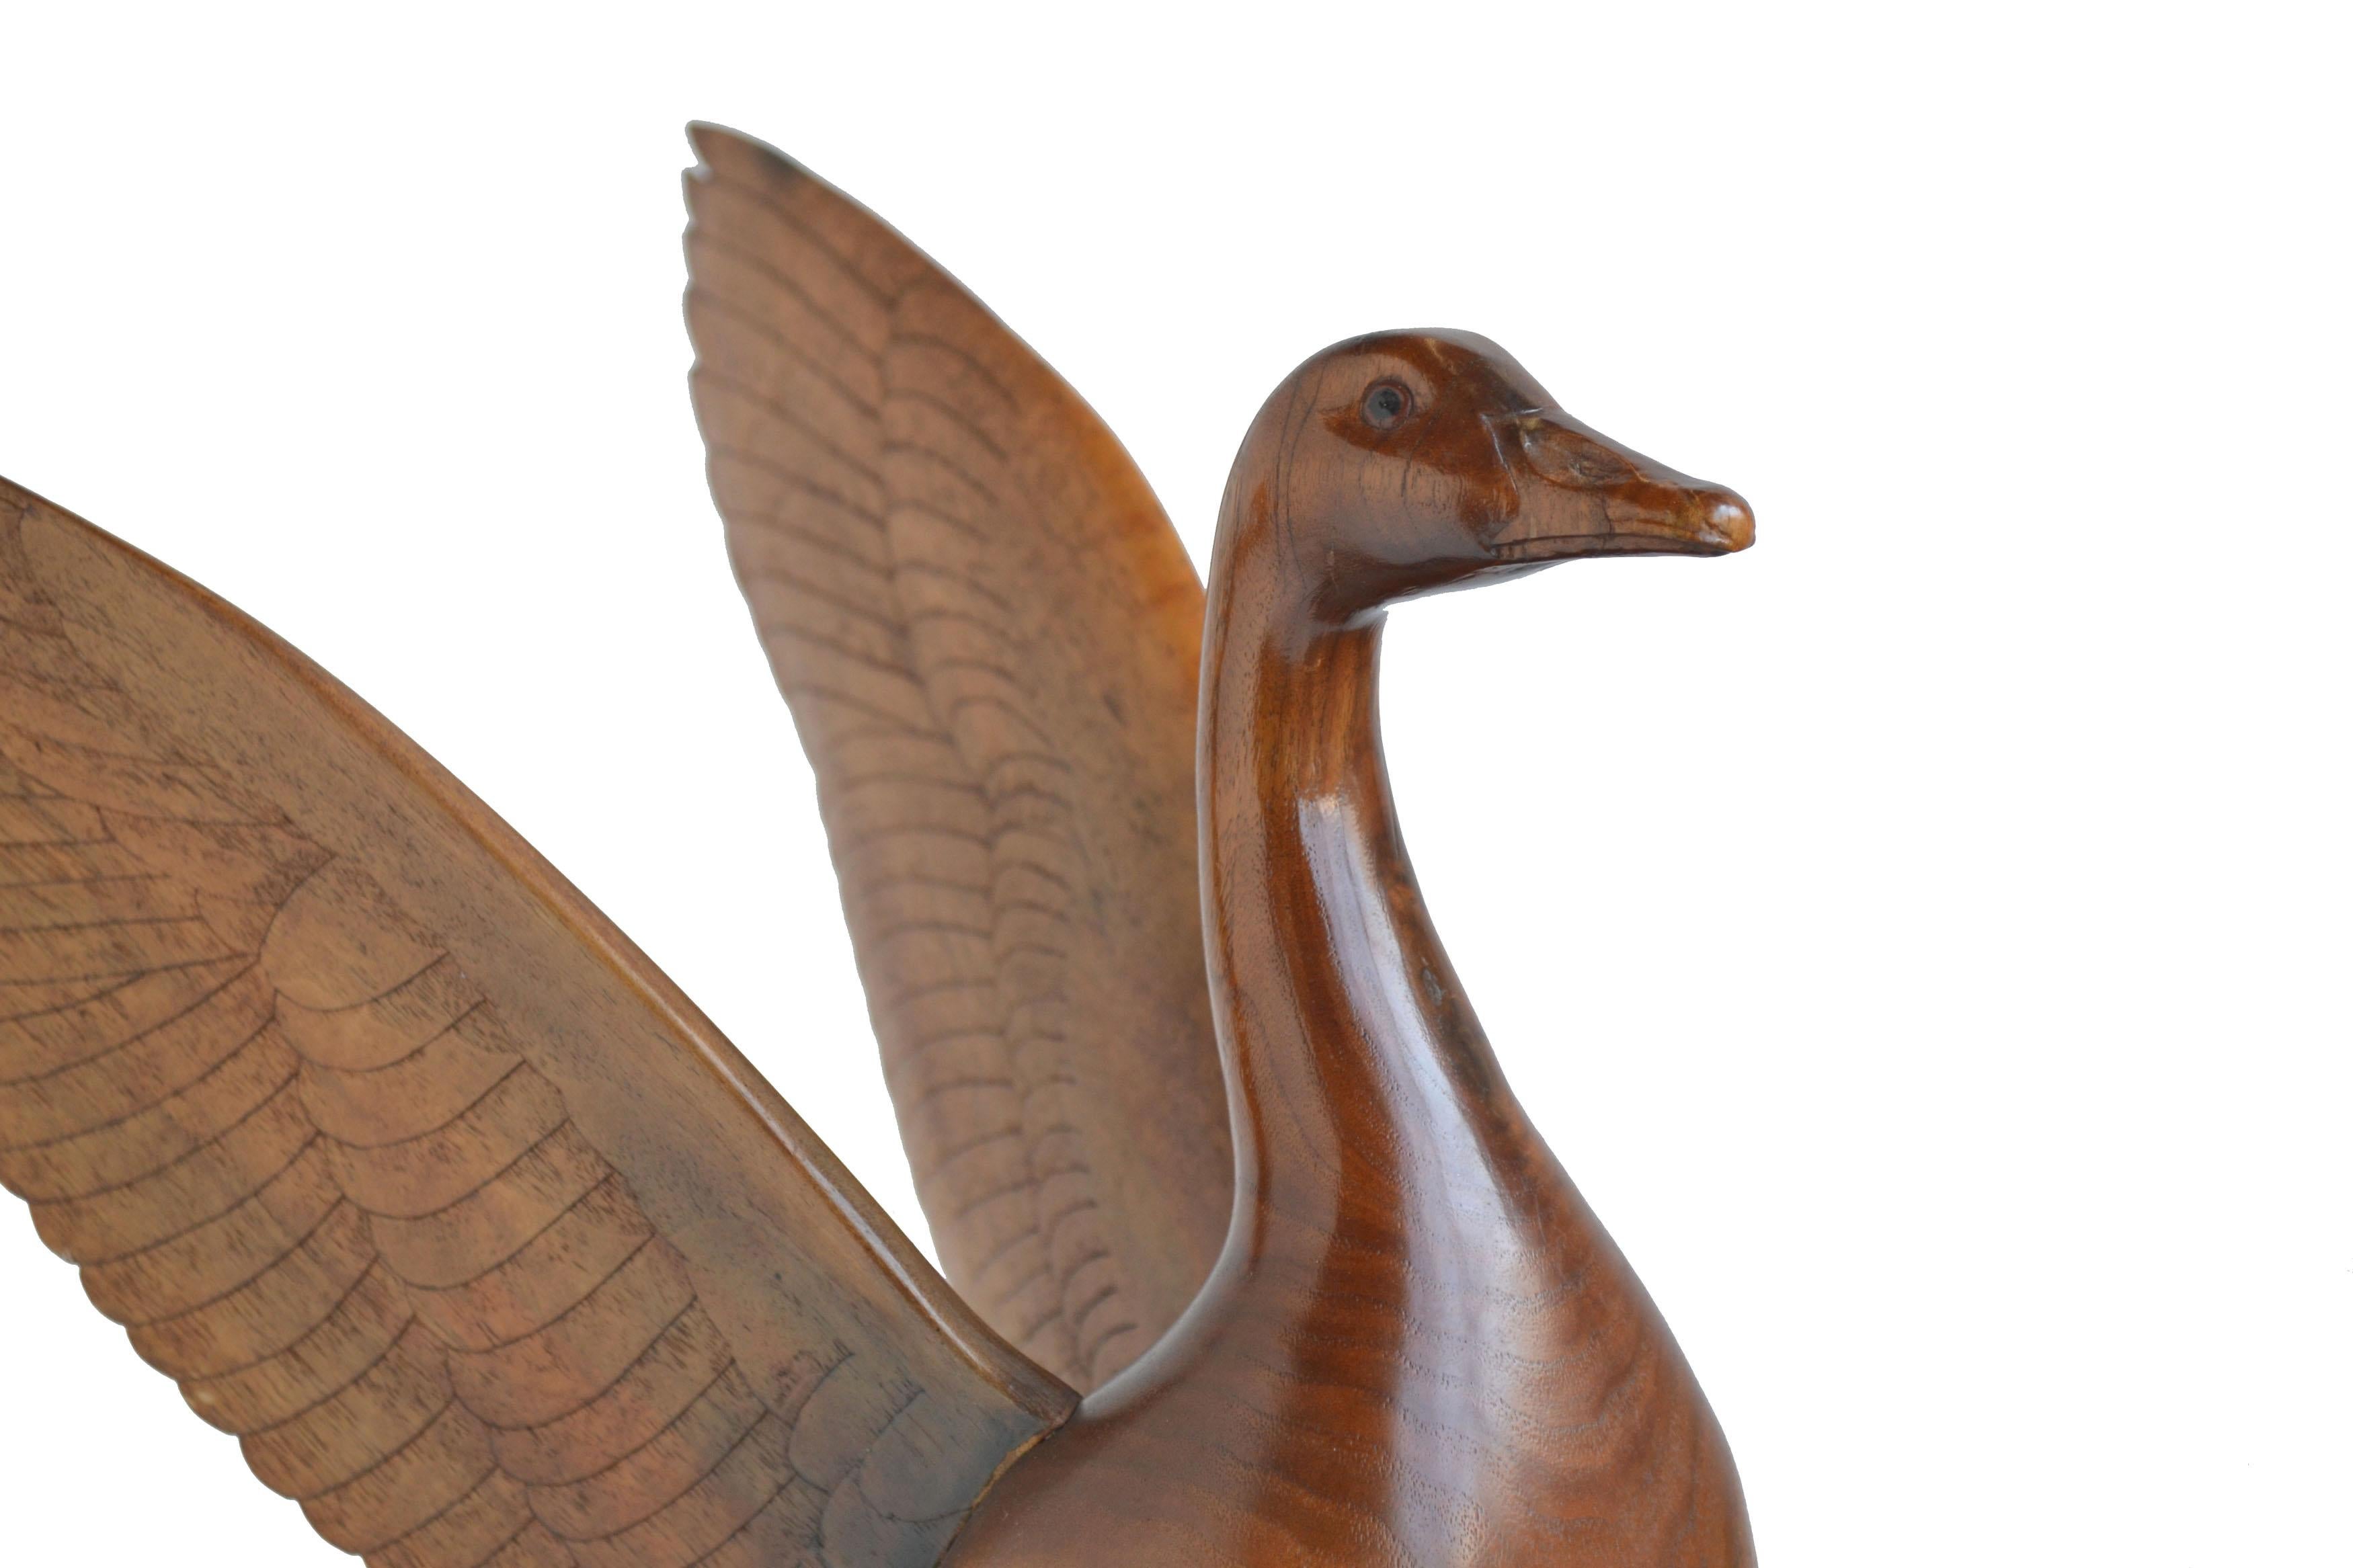 A beautiful, high polished sculpture of a goose with outstretched wings by Dale Eugene Schoth (American, 1925-1984). Appropriate to view in the round. Signed and dated by the artist 